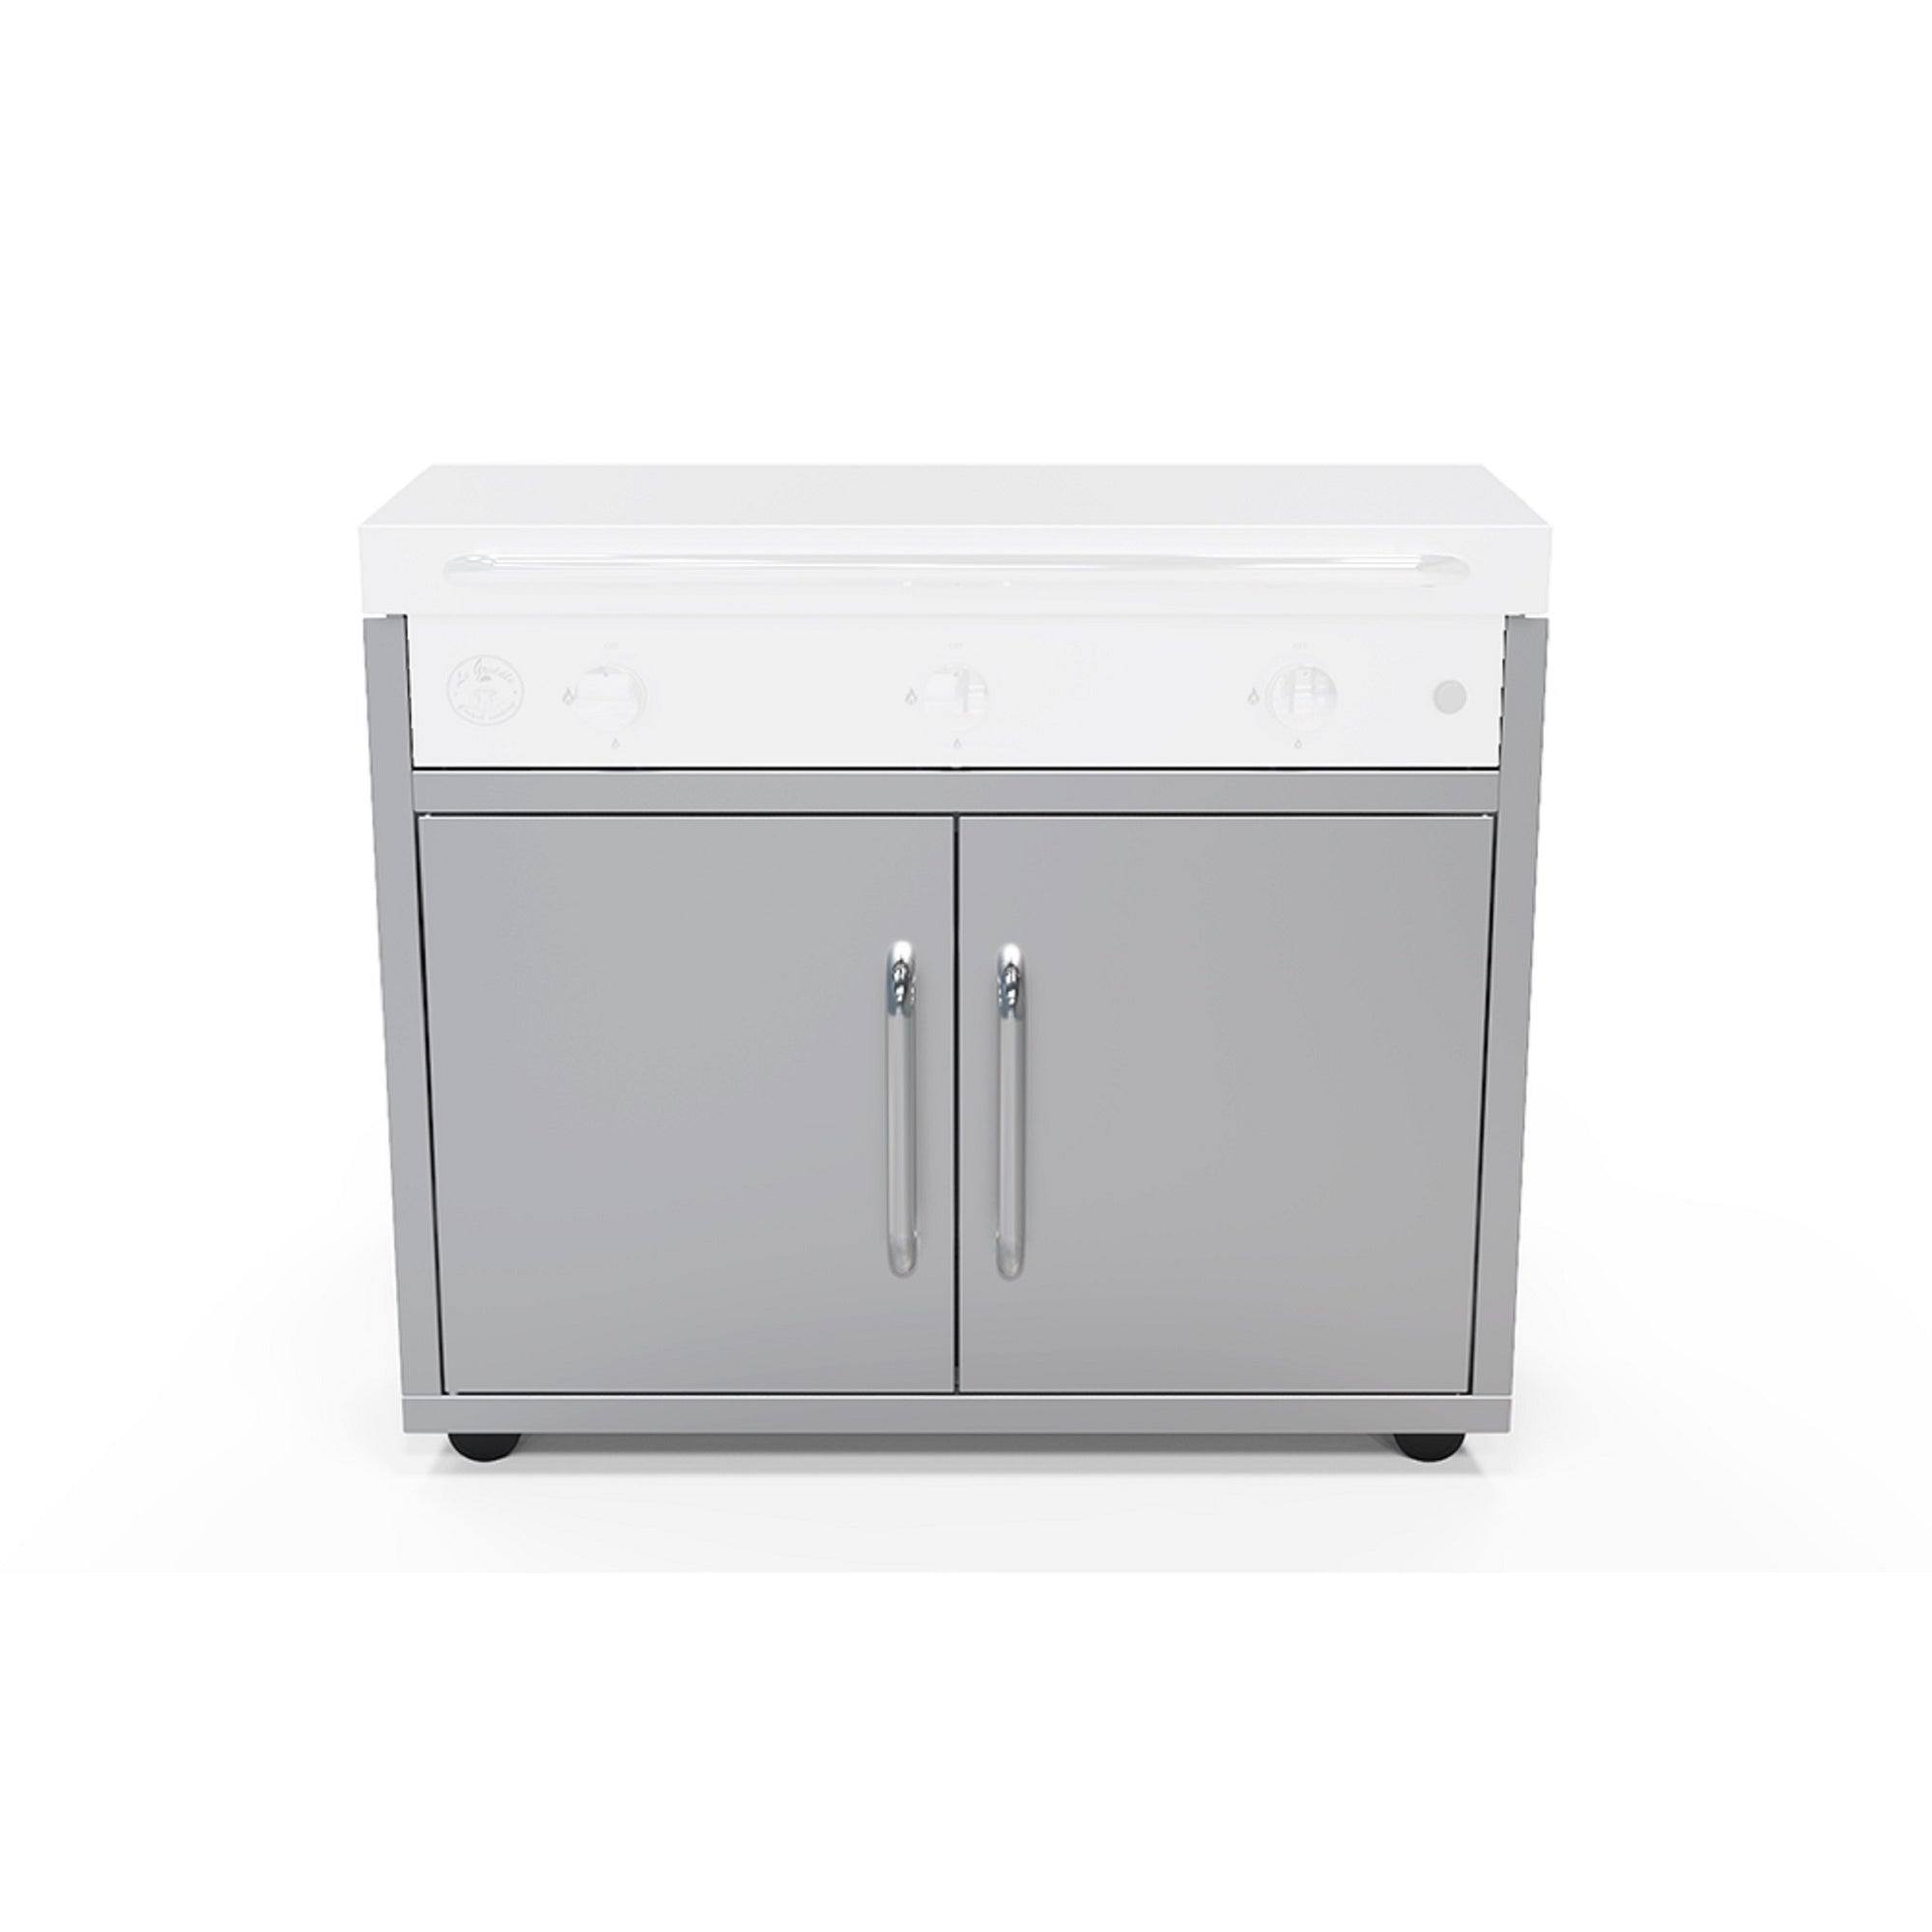 Cart for GFE105 Le Griddle - 304 Stainless Steel, Dual Access Doors in a white background front view